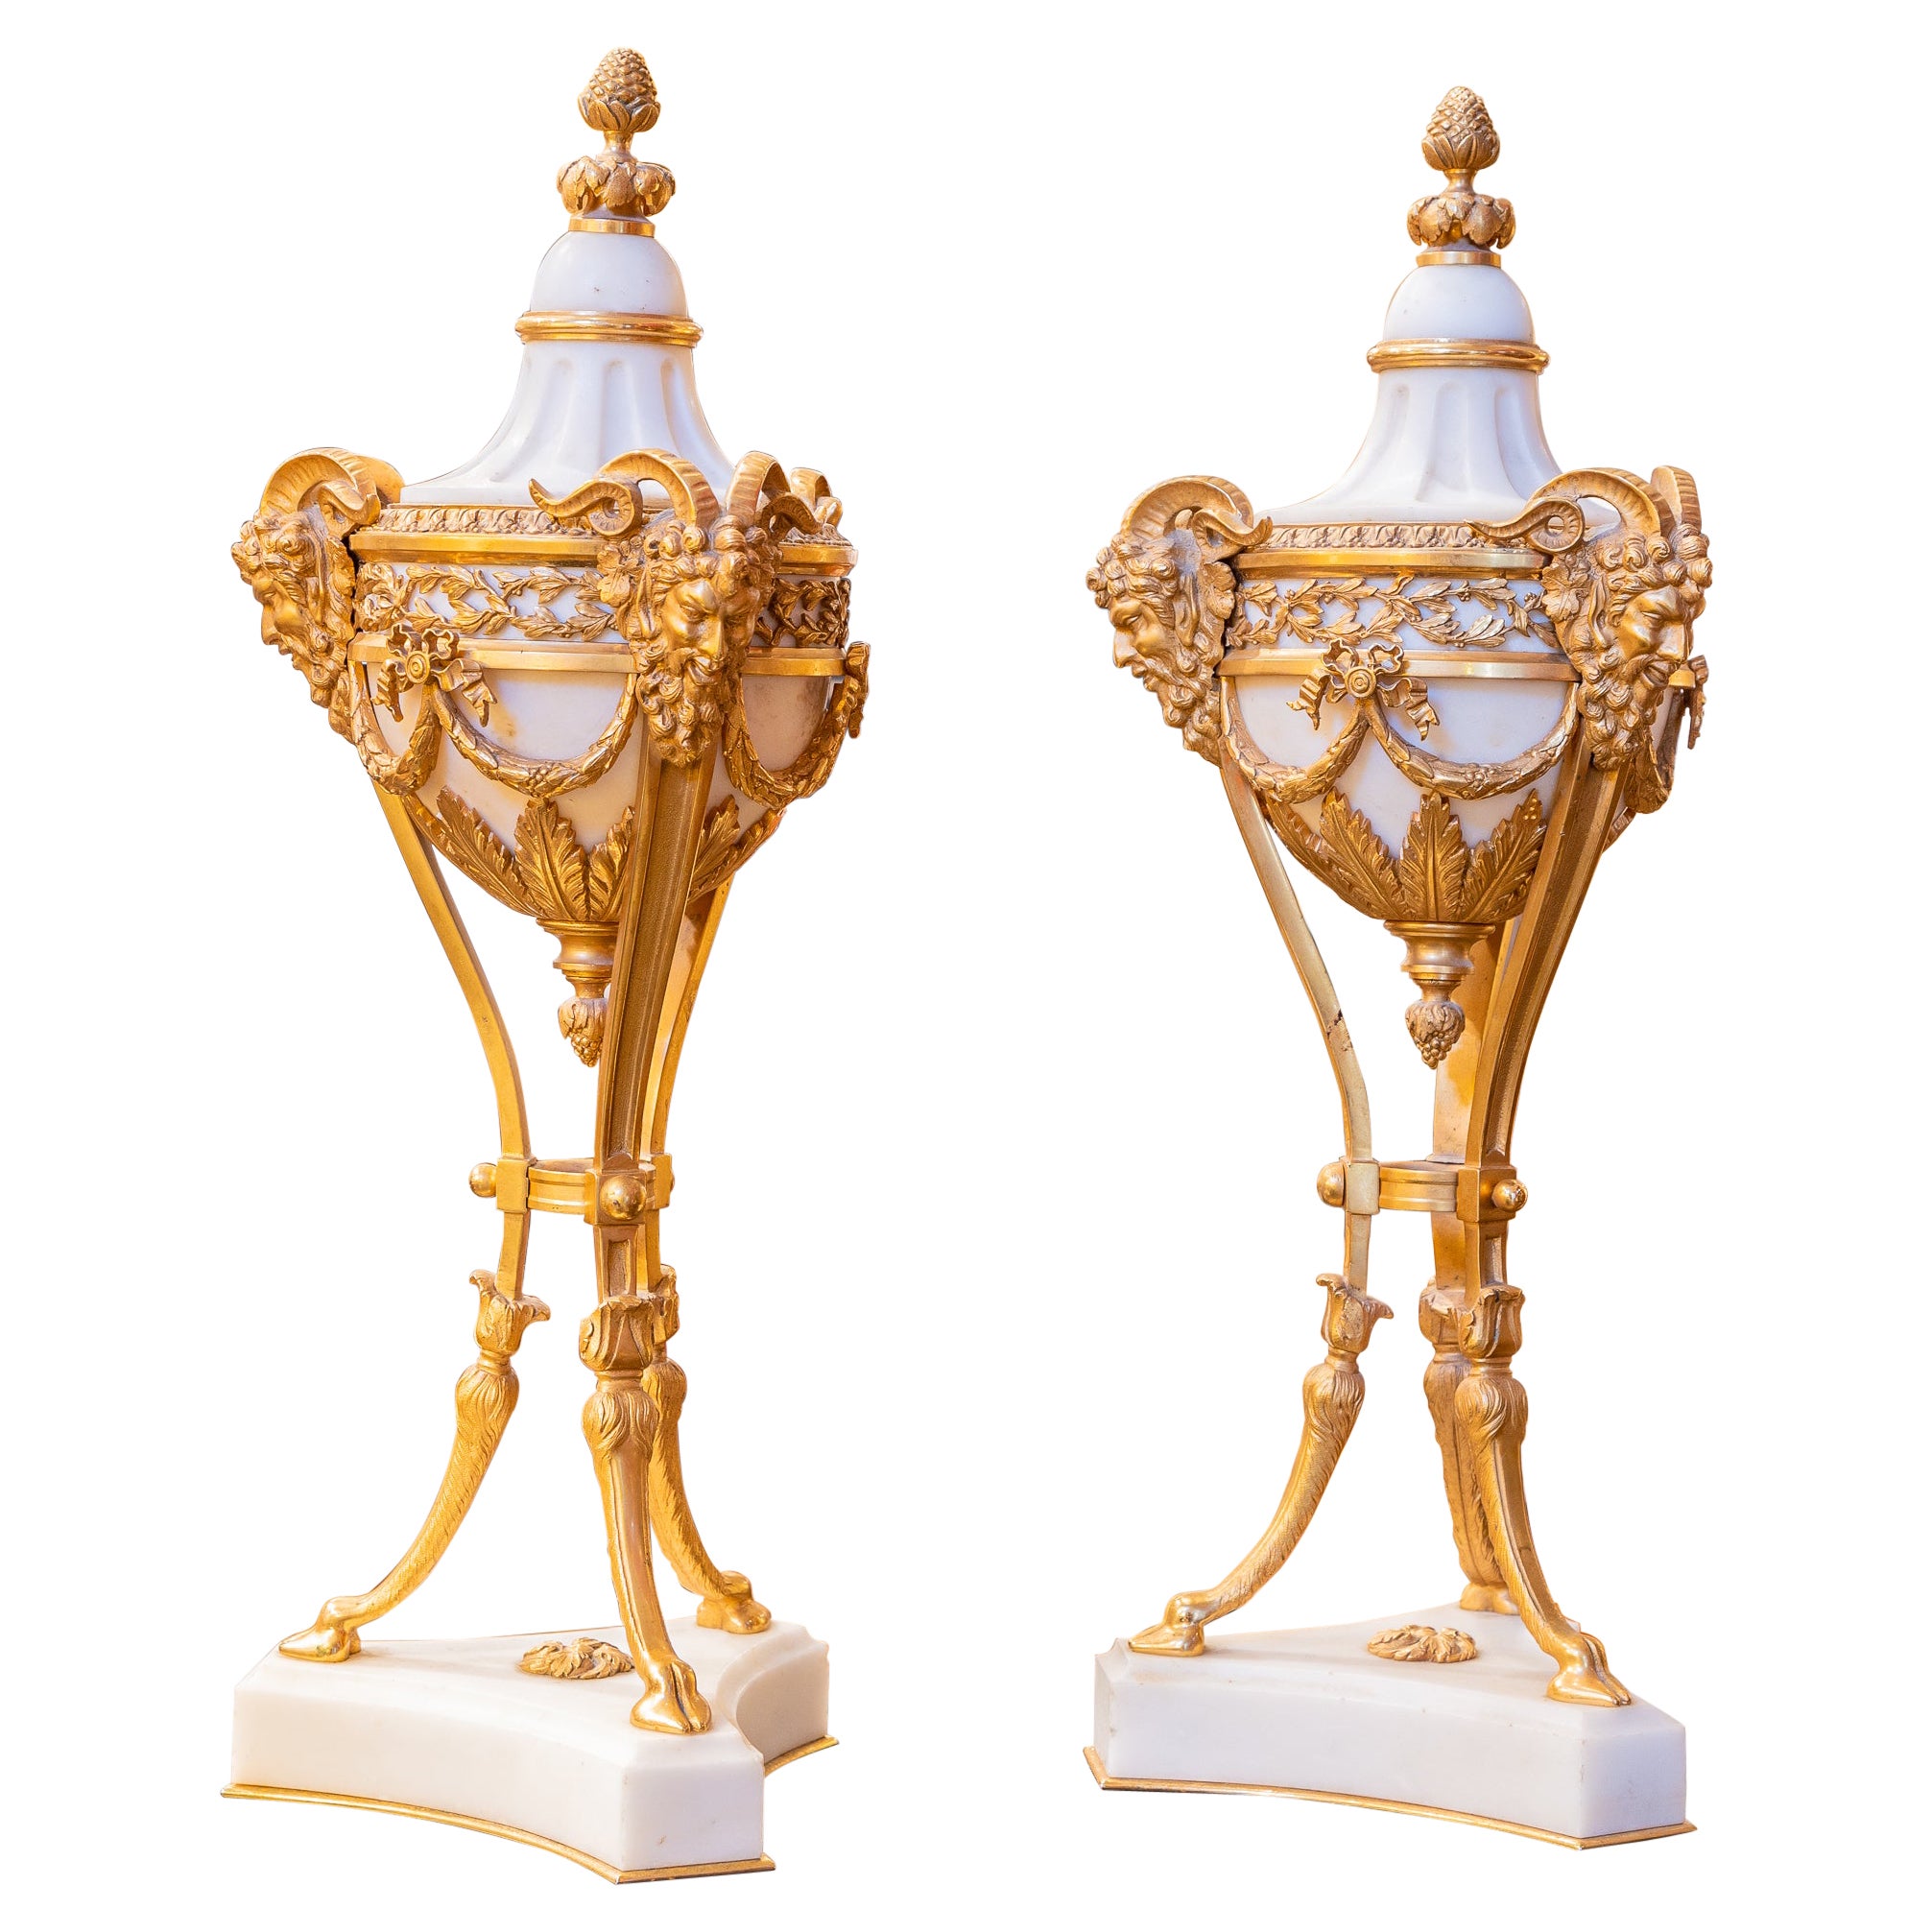 Fine and Beautiful Pair of 19th C French Marble and Gilt Bronze Cassolettes